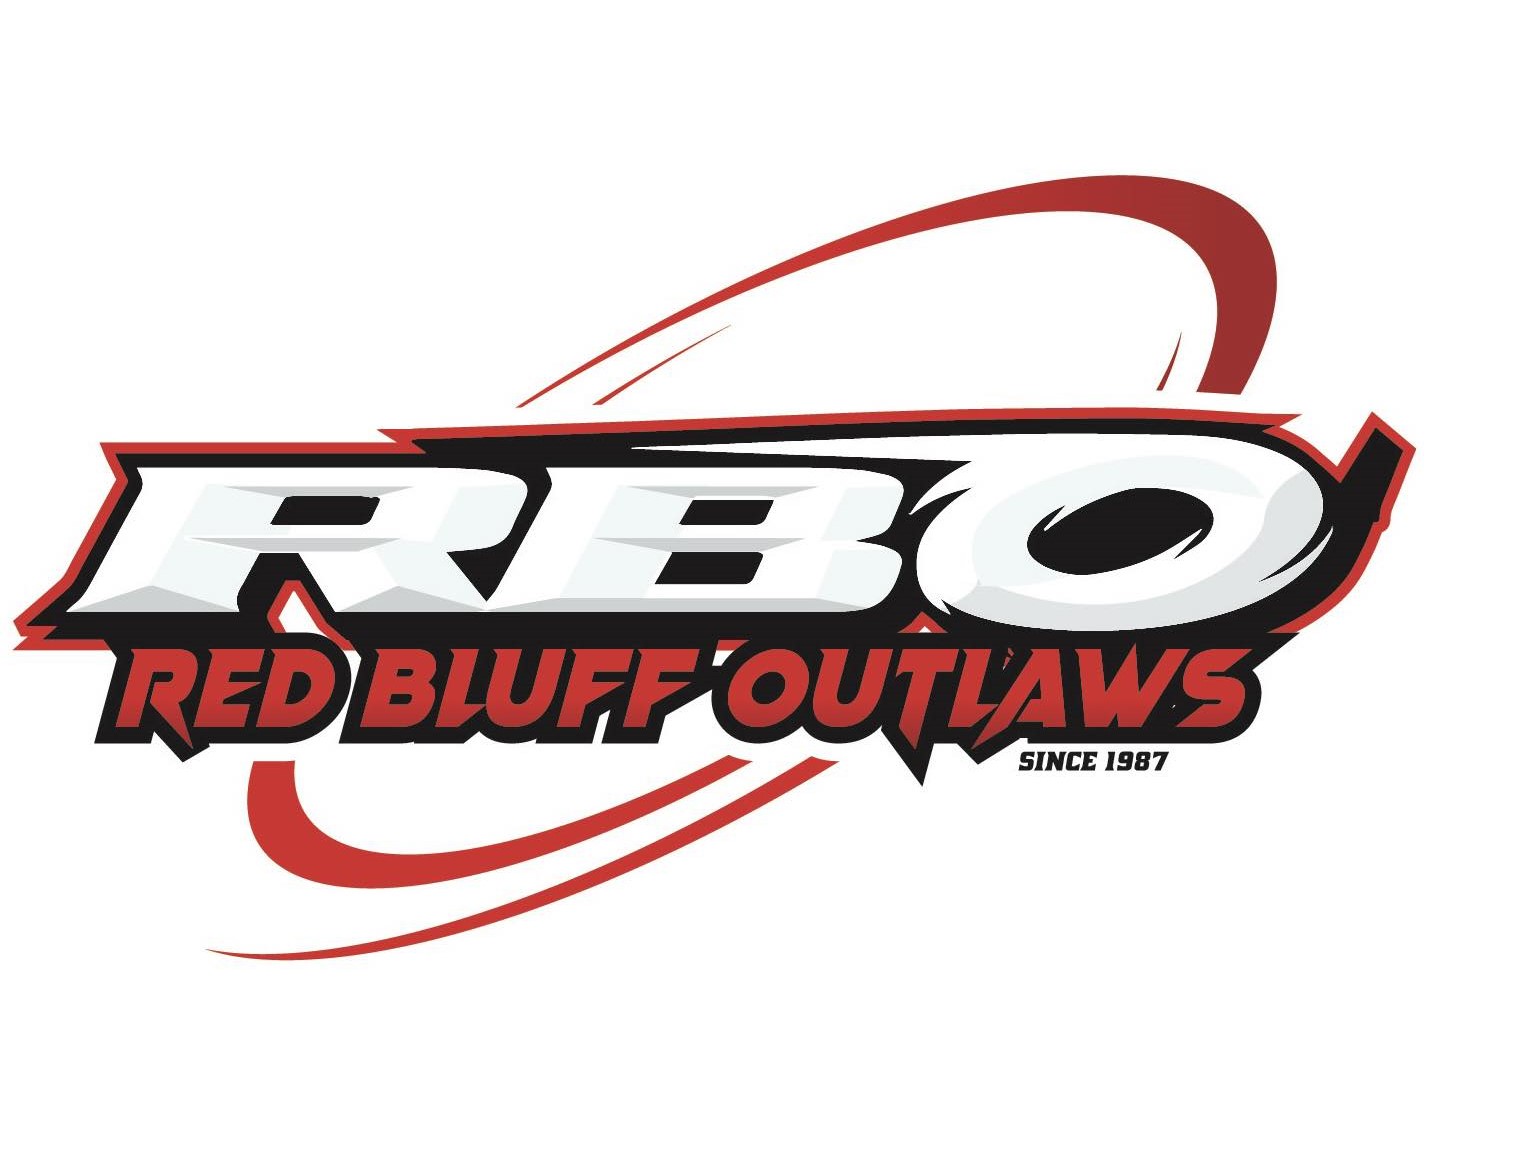 Red Bluff Outlaws